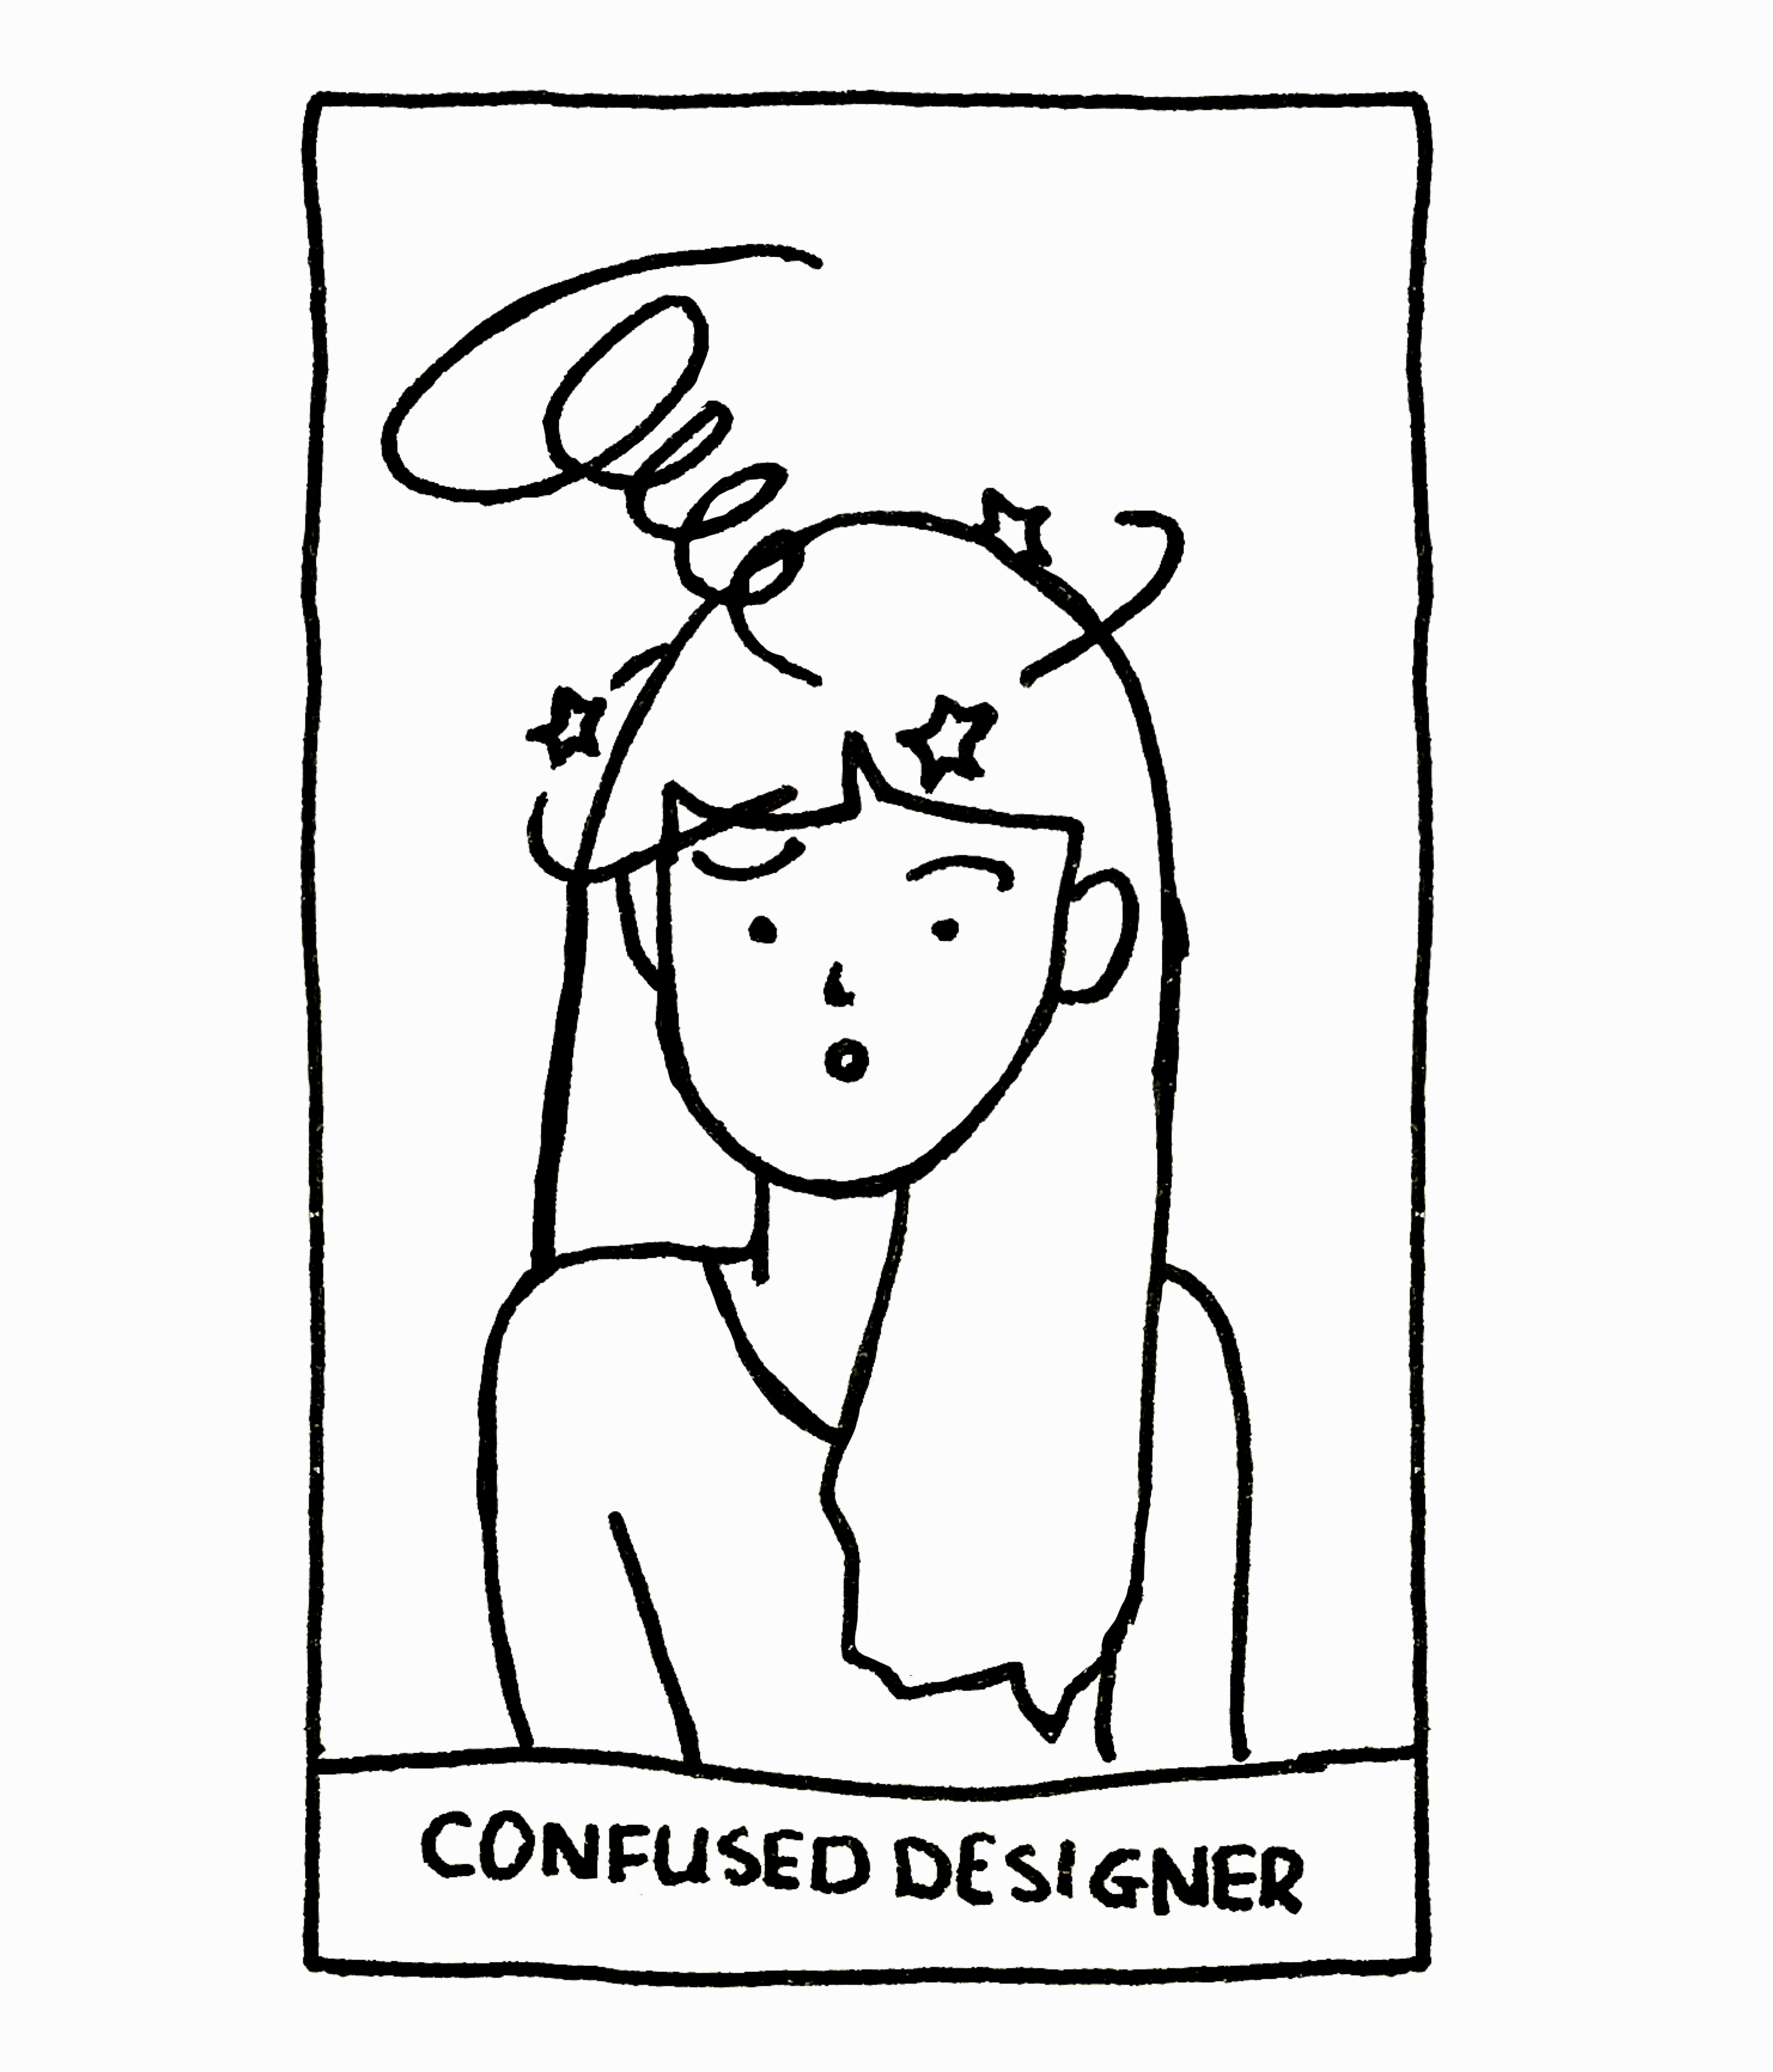 An illustration of a confused woman with the caption 'Confused Designer'.